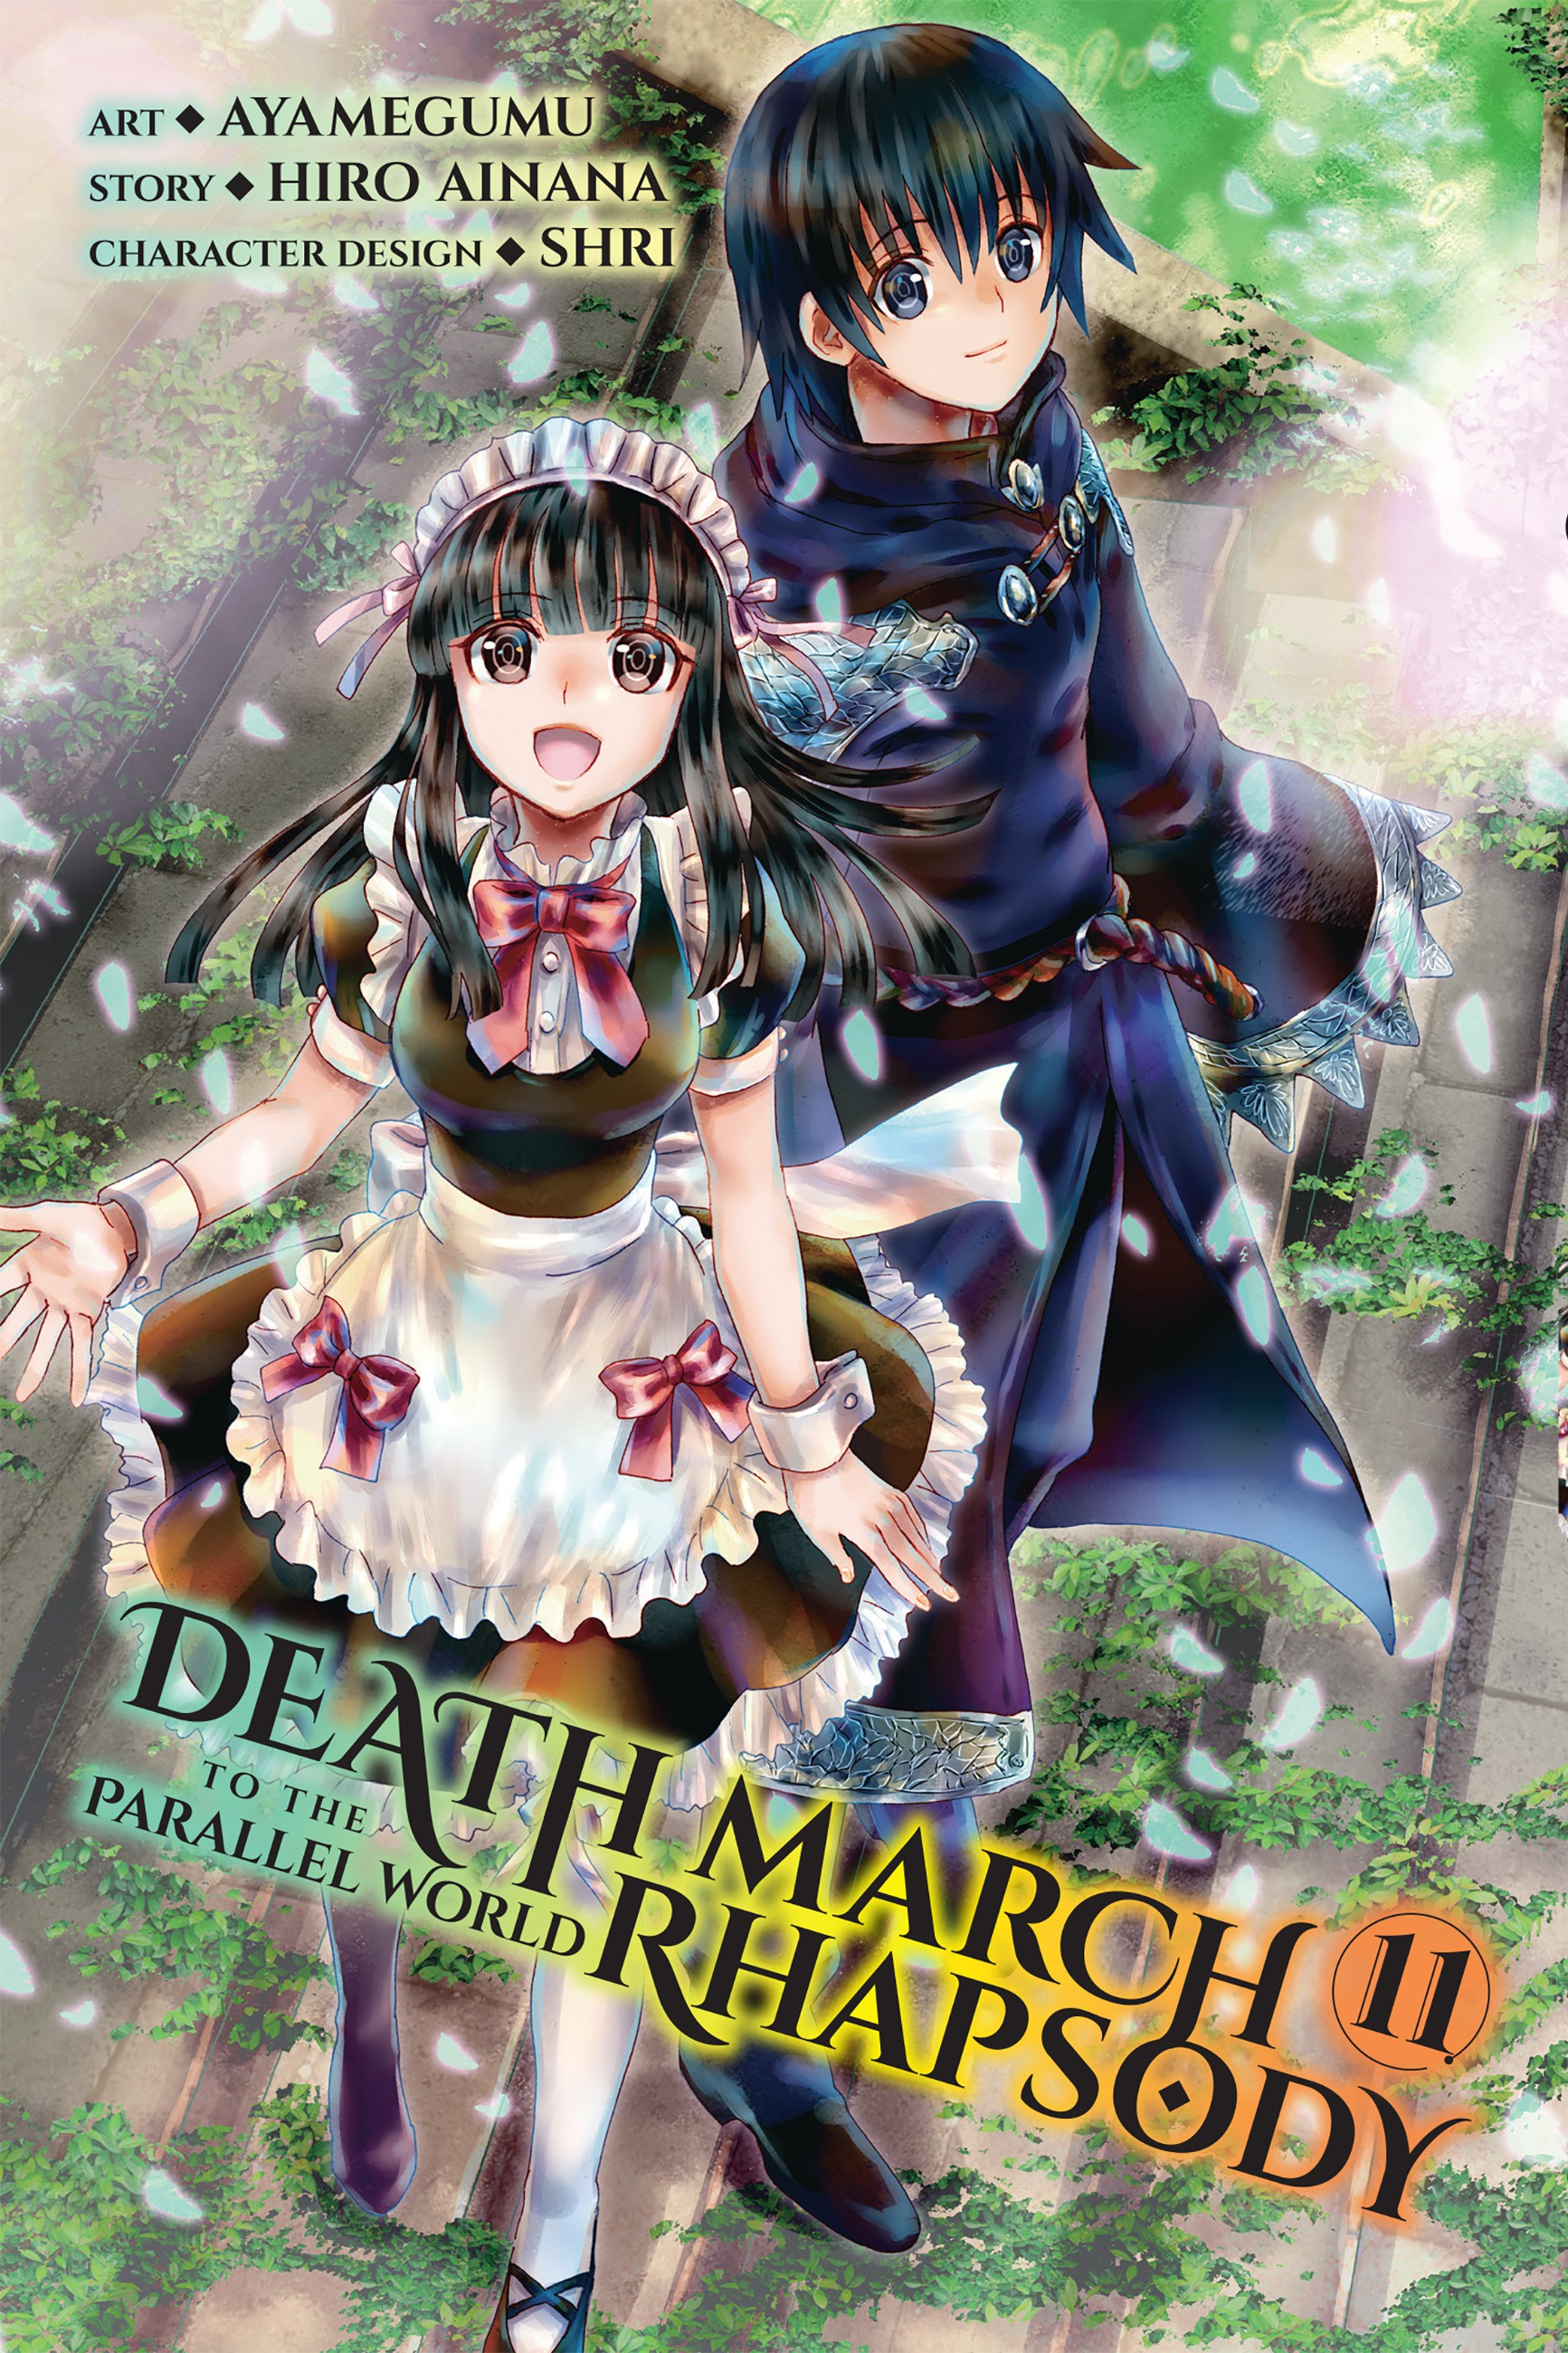 🔥 Death March to the Parallel World Rhapsody MBTI Personality Type - Anime  & Manga